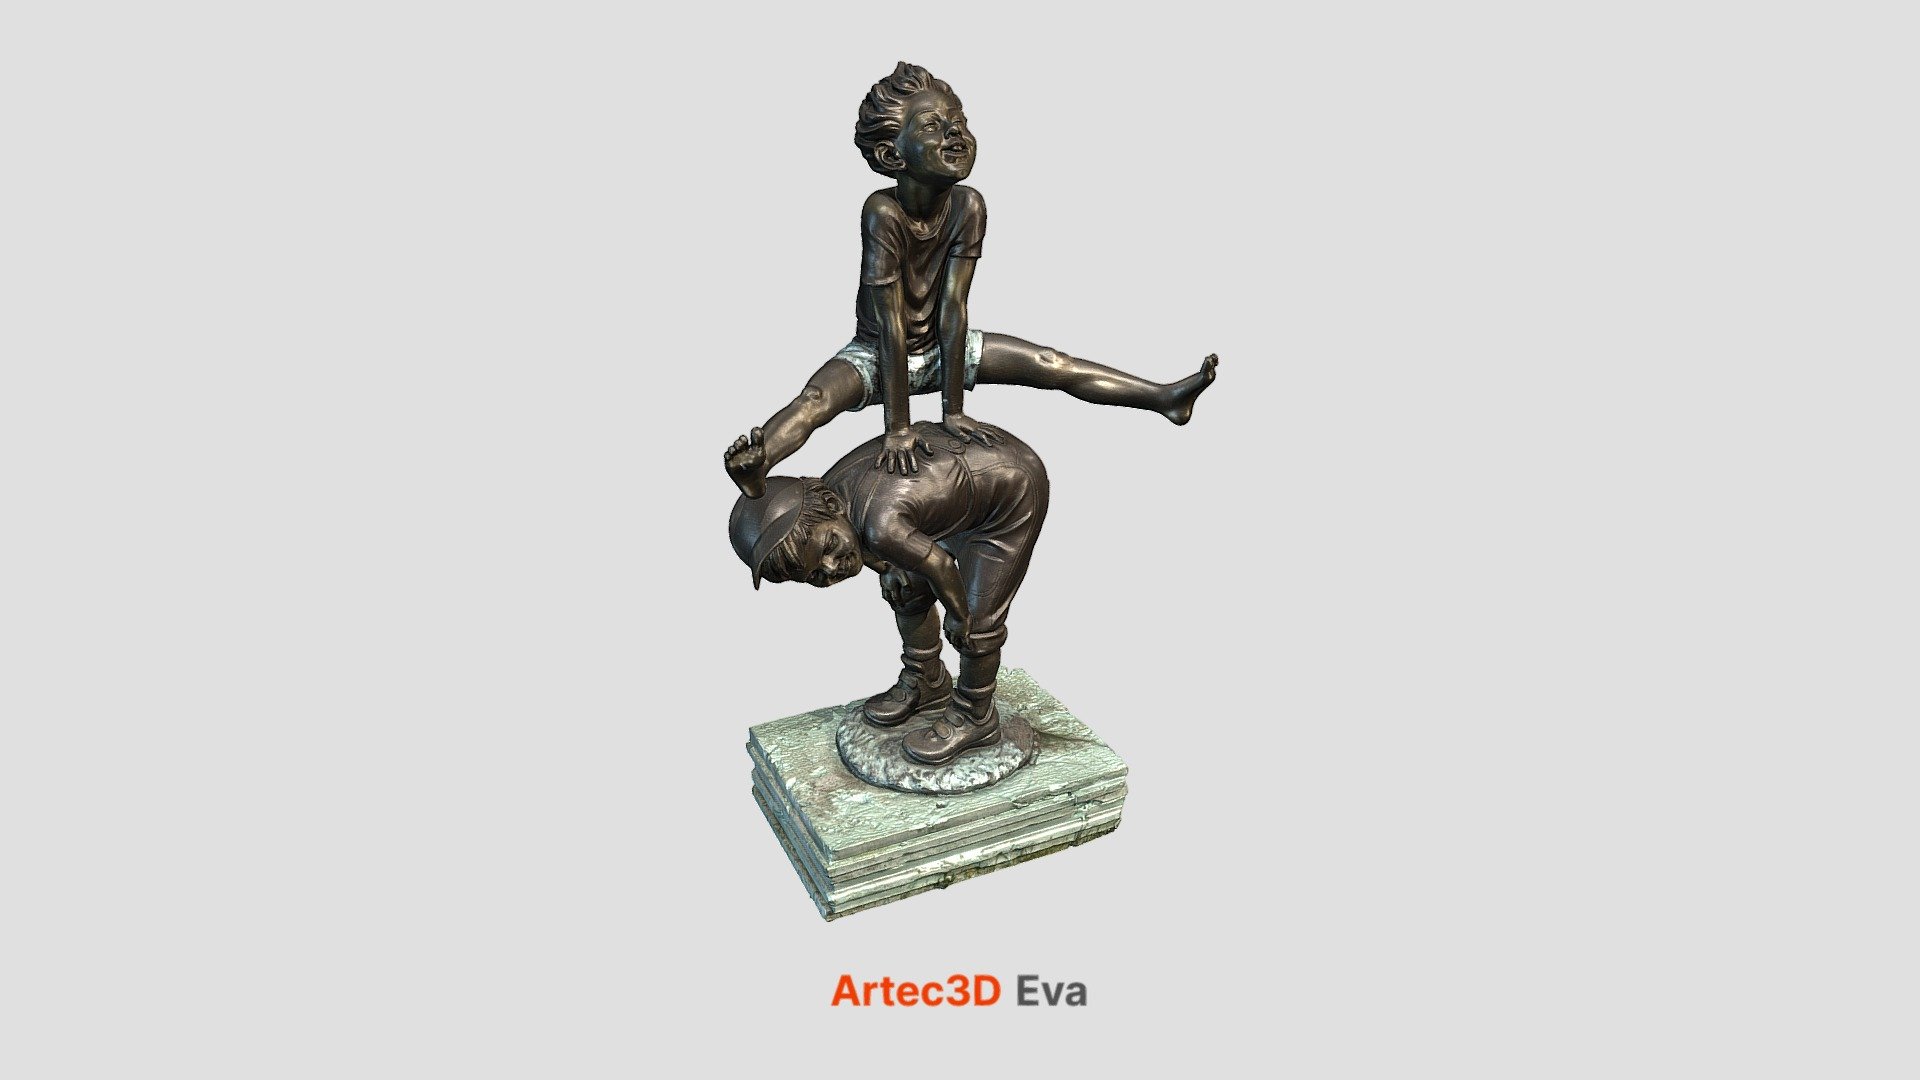 A bronze statue of two boys playing leapfrog made by sculptor Katib Mamedov is about 1.6m high. The legs in midair required a careful choice of a scanning angle to provide enough surface for registration. Other than that, the statue was incredibly easy to scan by Artec Eva, and was processed very quickly by Autopilot in Artec Studio.
Scanning time: 20 minutes
Processing time: 15 minutes - Two Friends - 3D model by Artec 3D 3d model